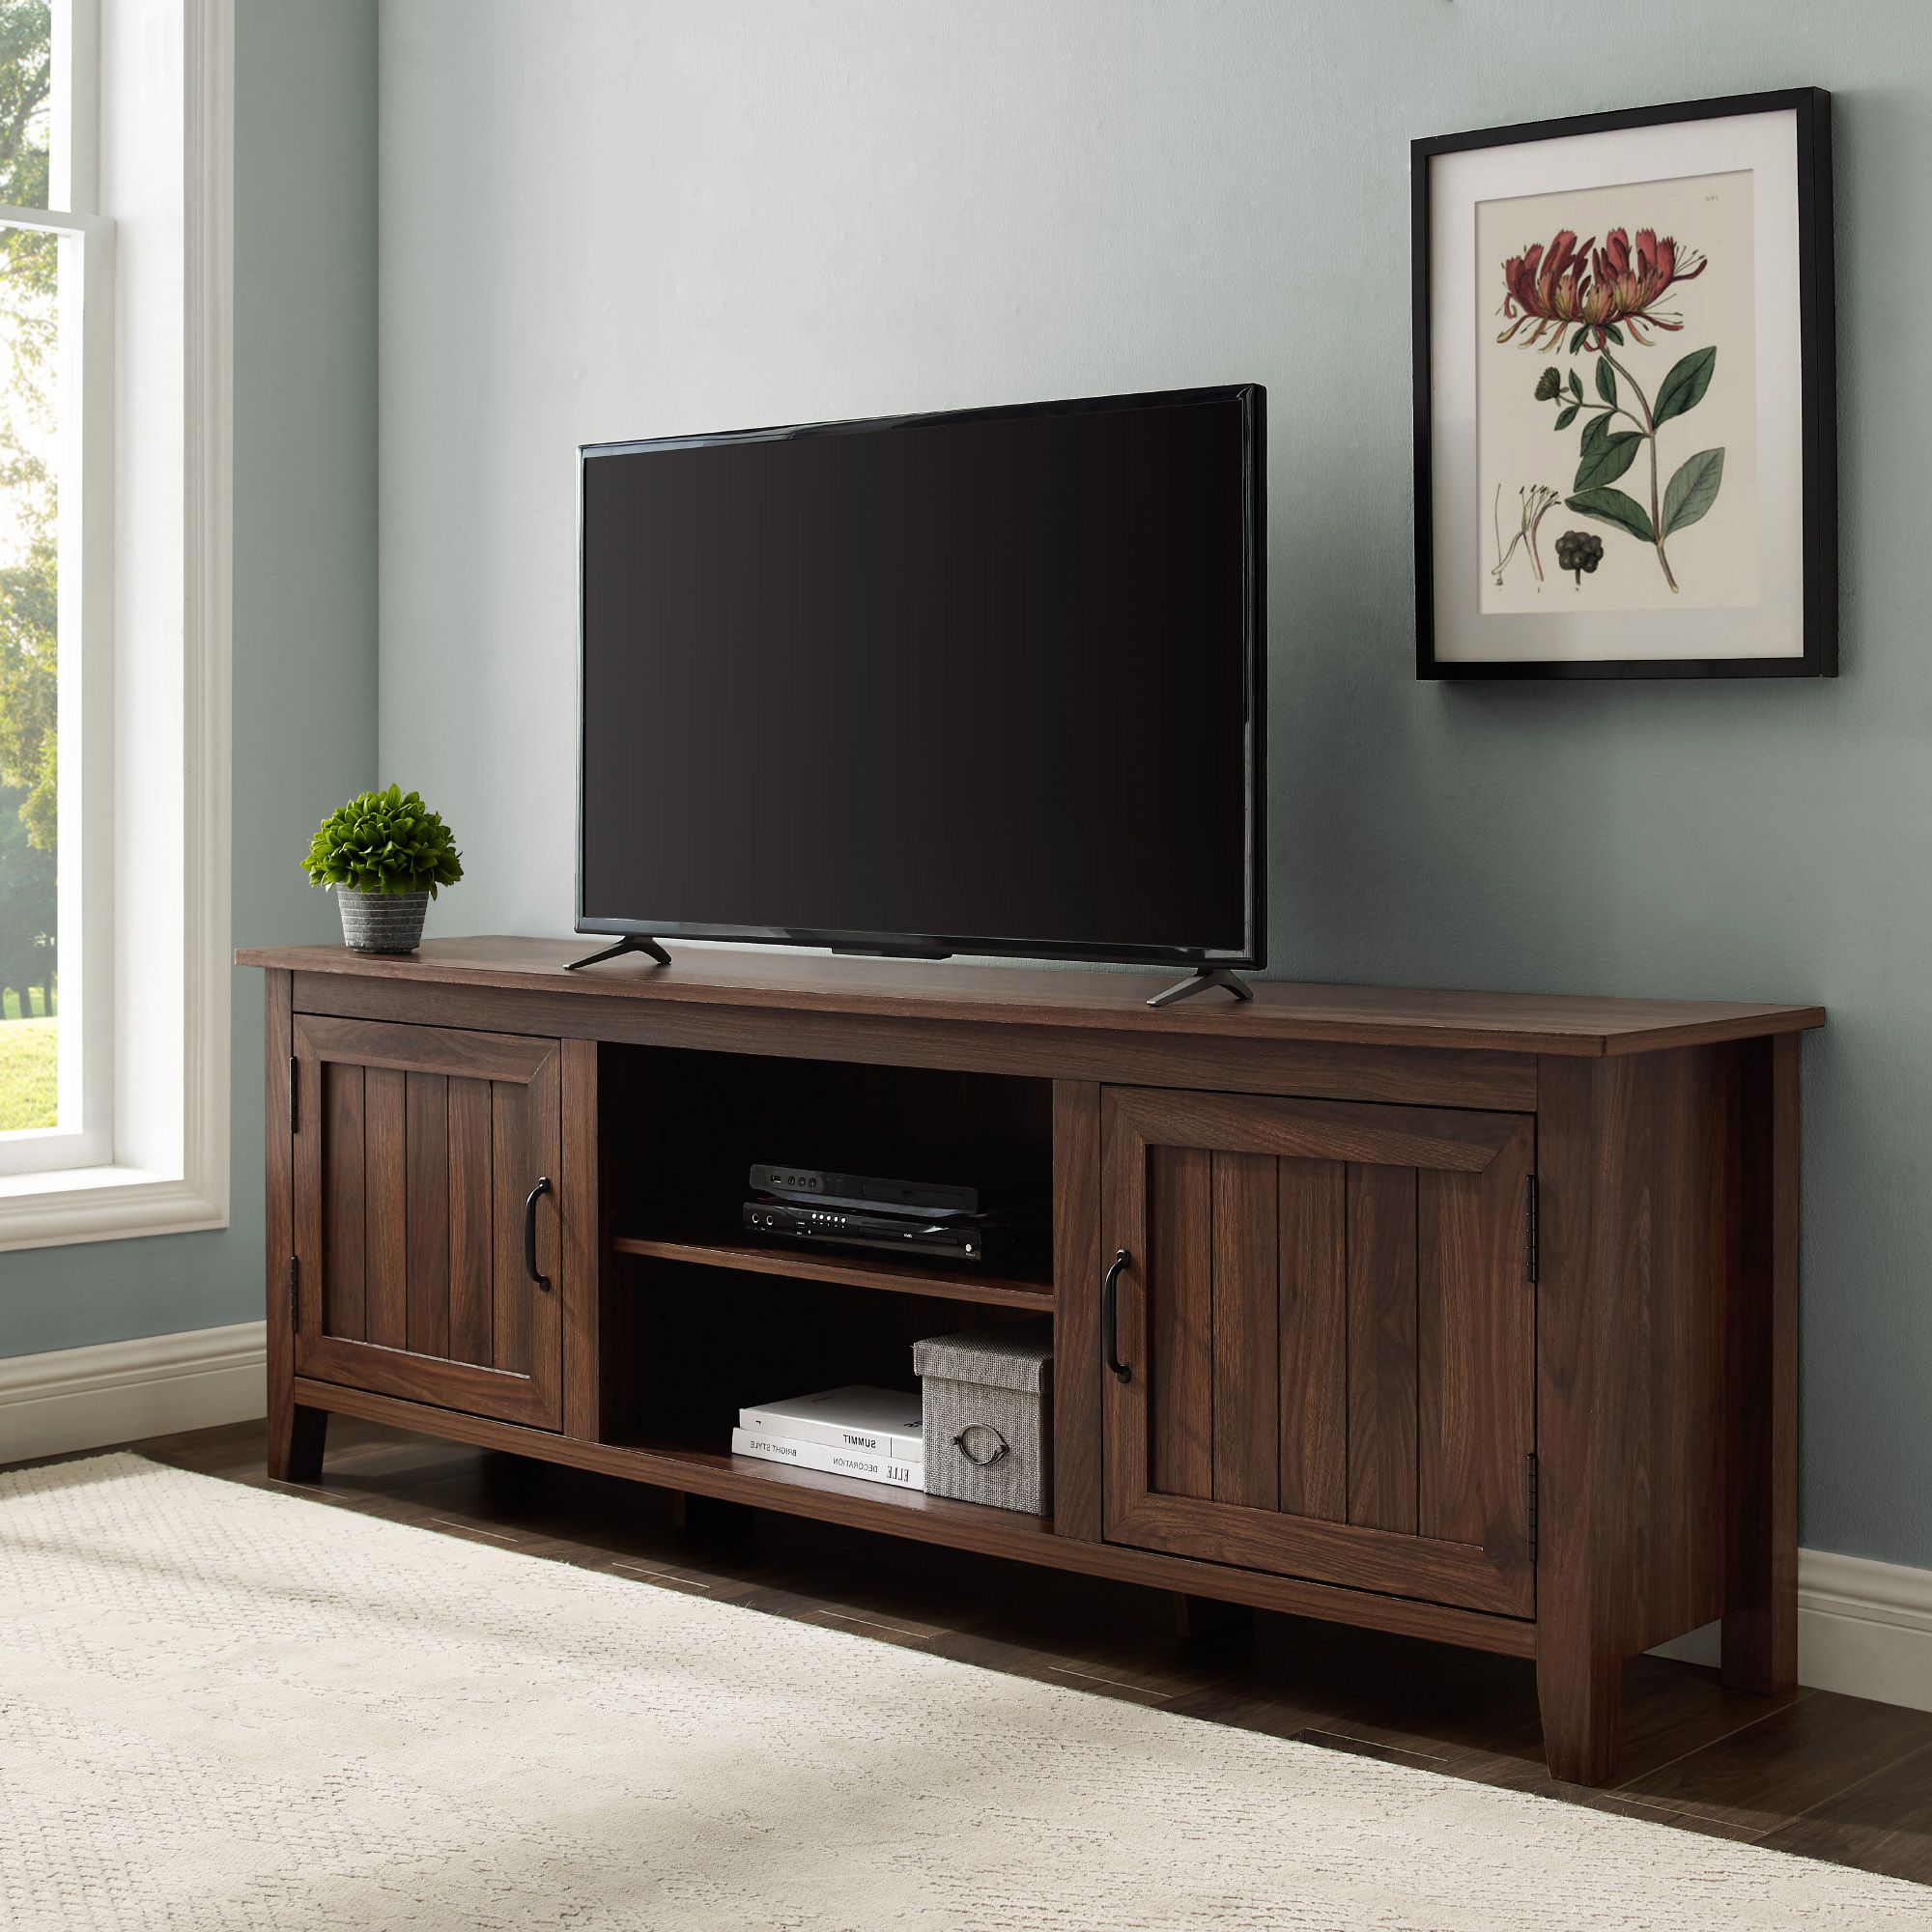 W. Trends 70&quot; Modern Farmhouse 2 Door TV Stand for Most TV's up to 80&quot; - Dark Walnut